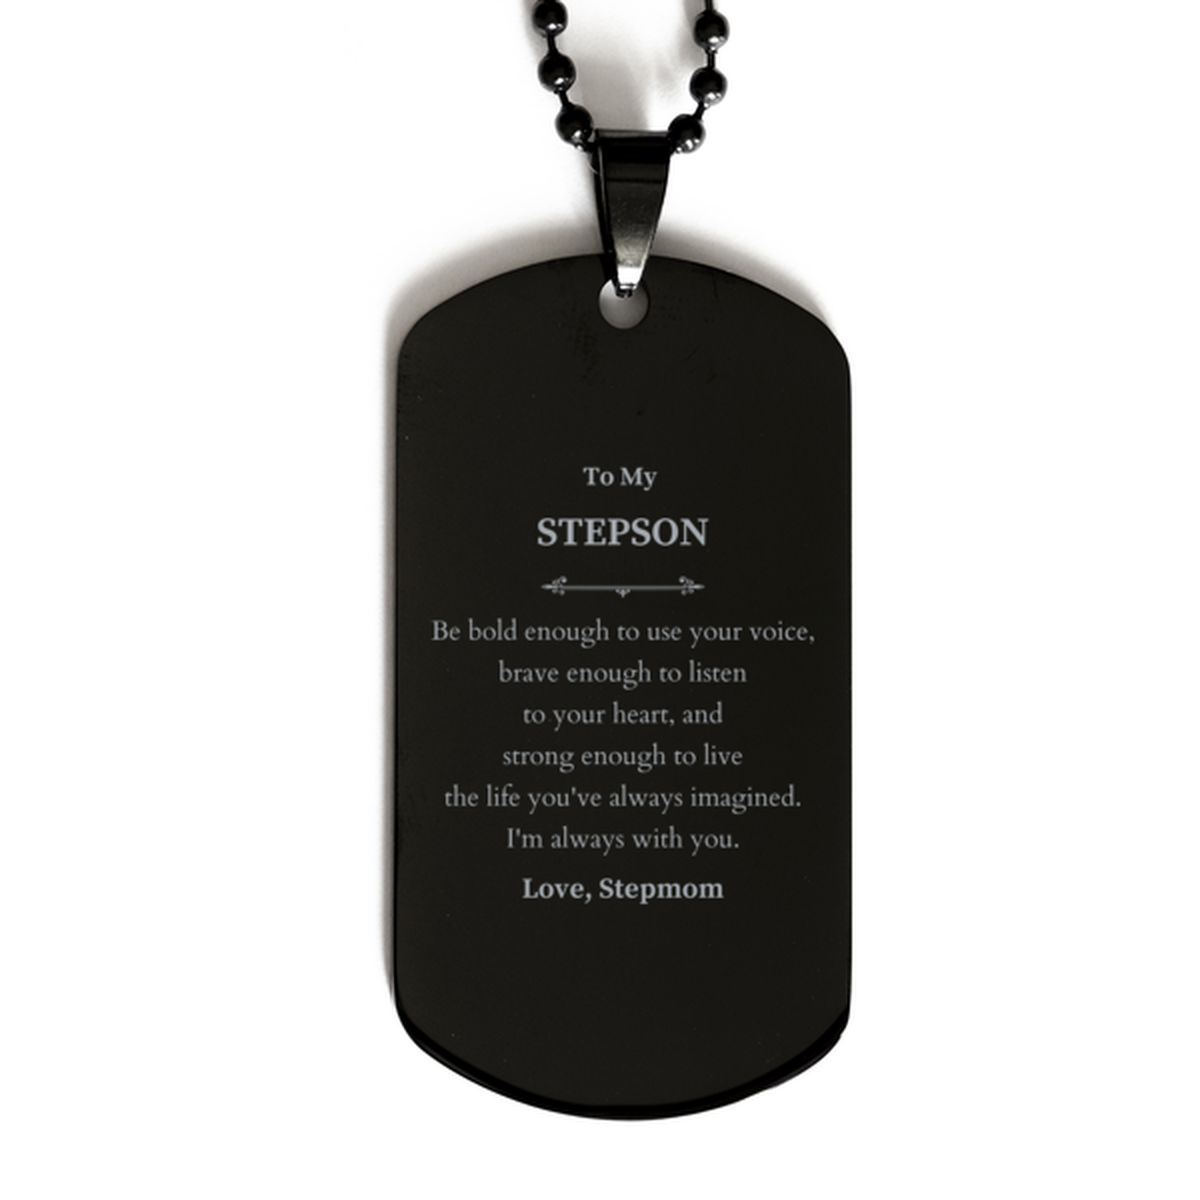 Keepsake Stepson Black Dog Tag Gift Idea Graduation Christmas Birthday Stepson from Stepmom, Stepson Be bold enough to use your voice, brave enough to listen to your heart. Love, Stepmom